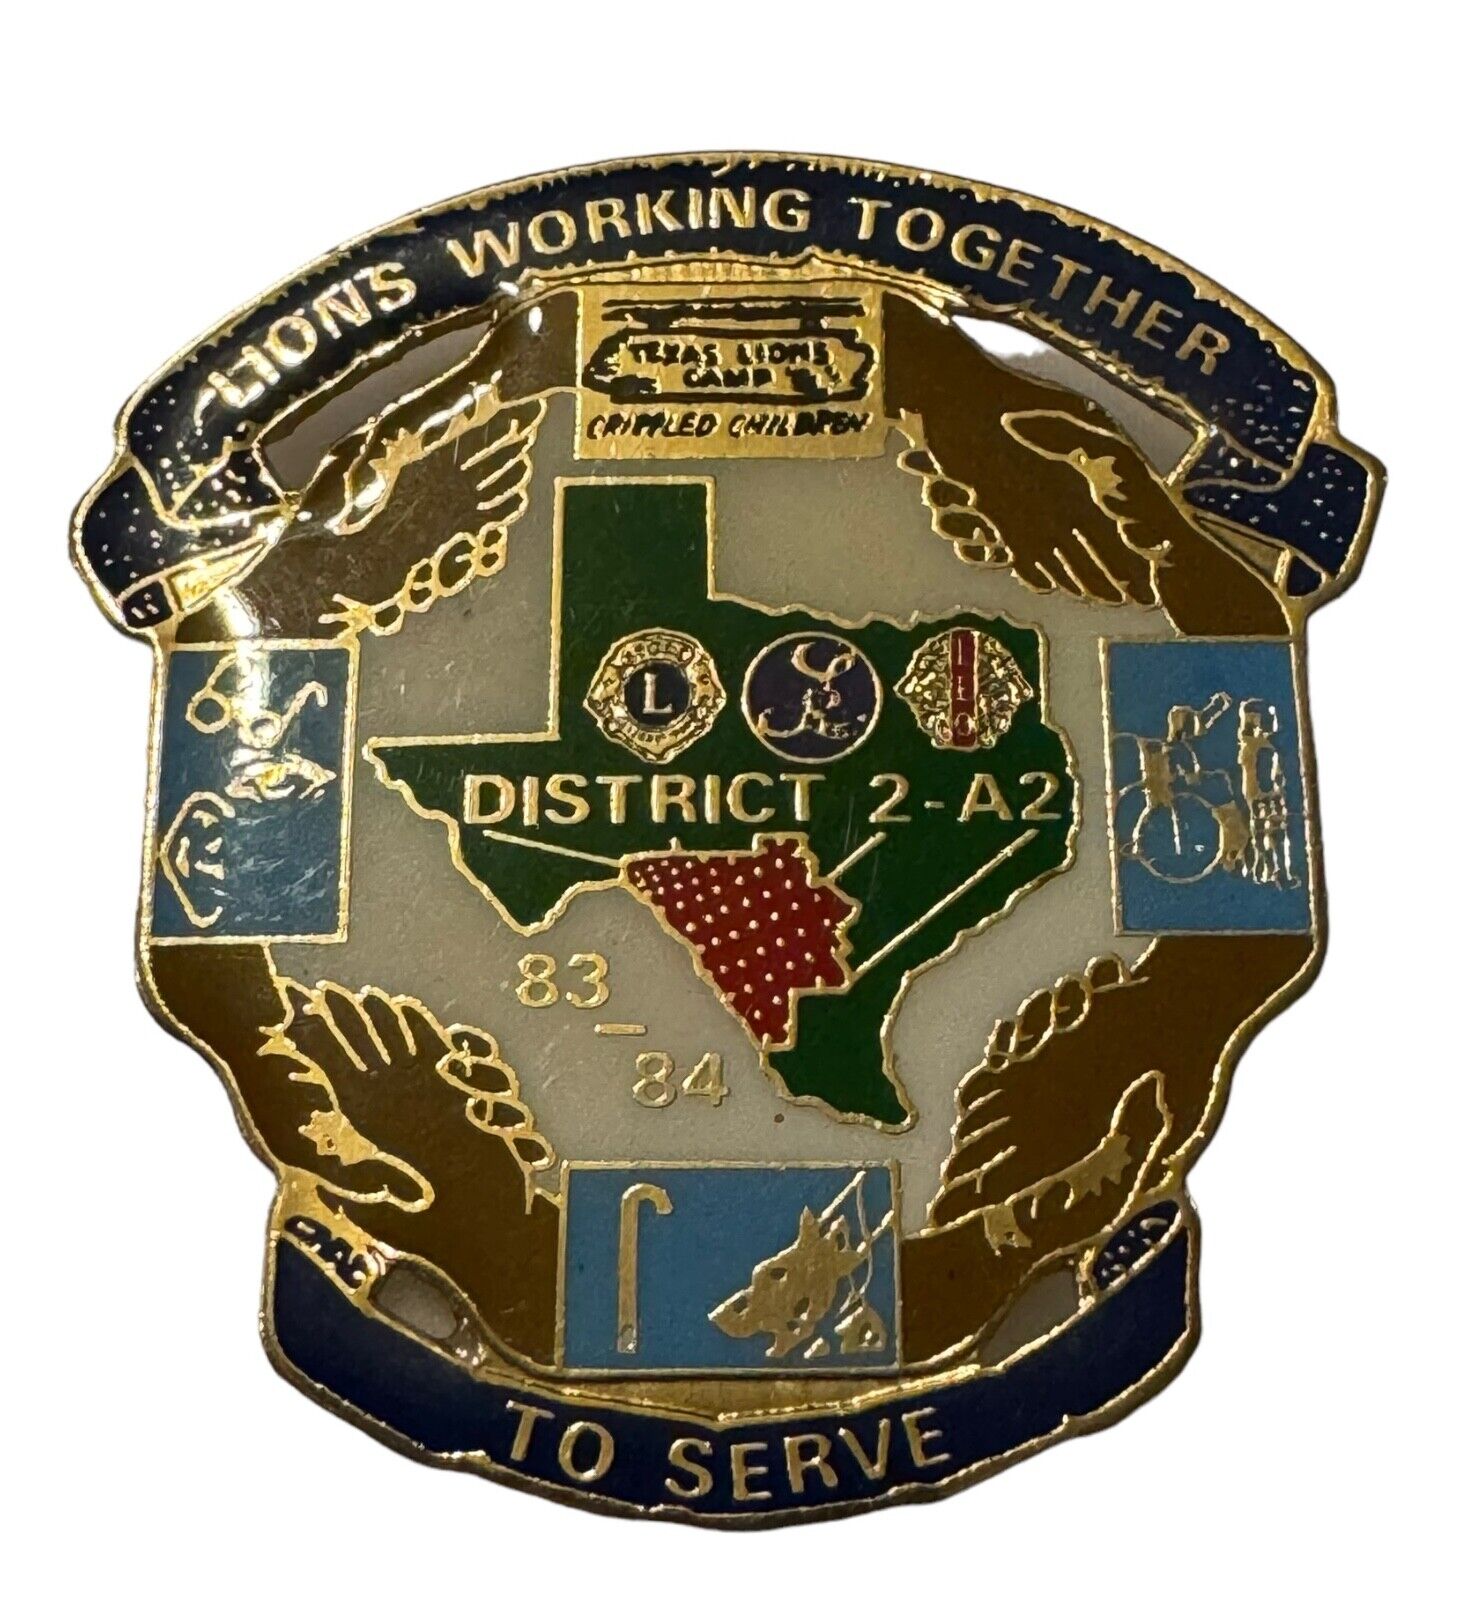 Lions Club 83-84 Texas District 2-A2 Working Together Lapel Pin